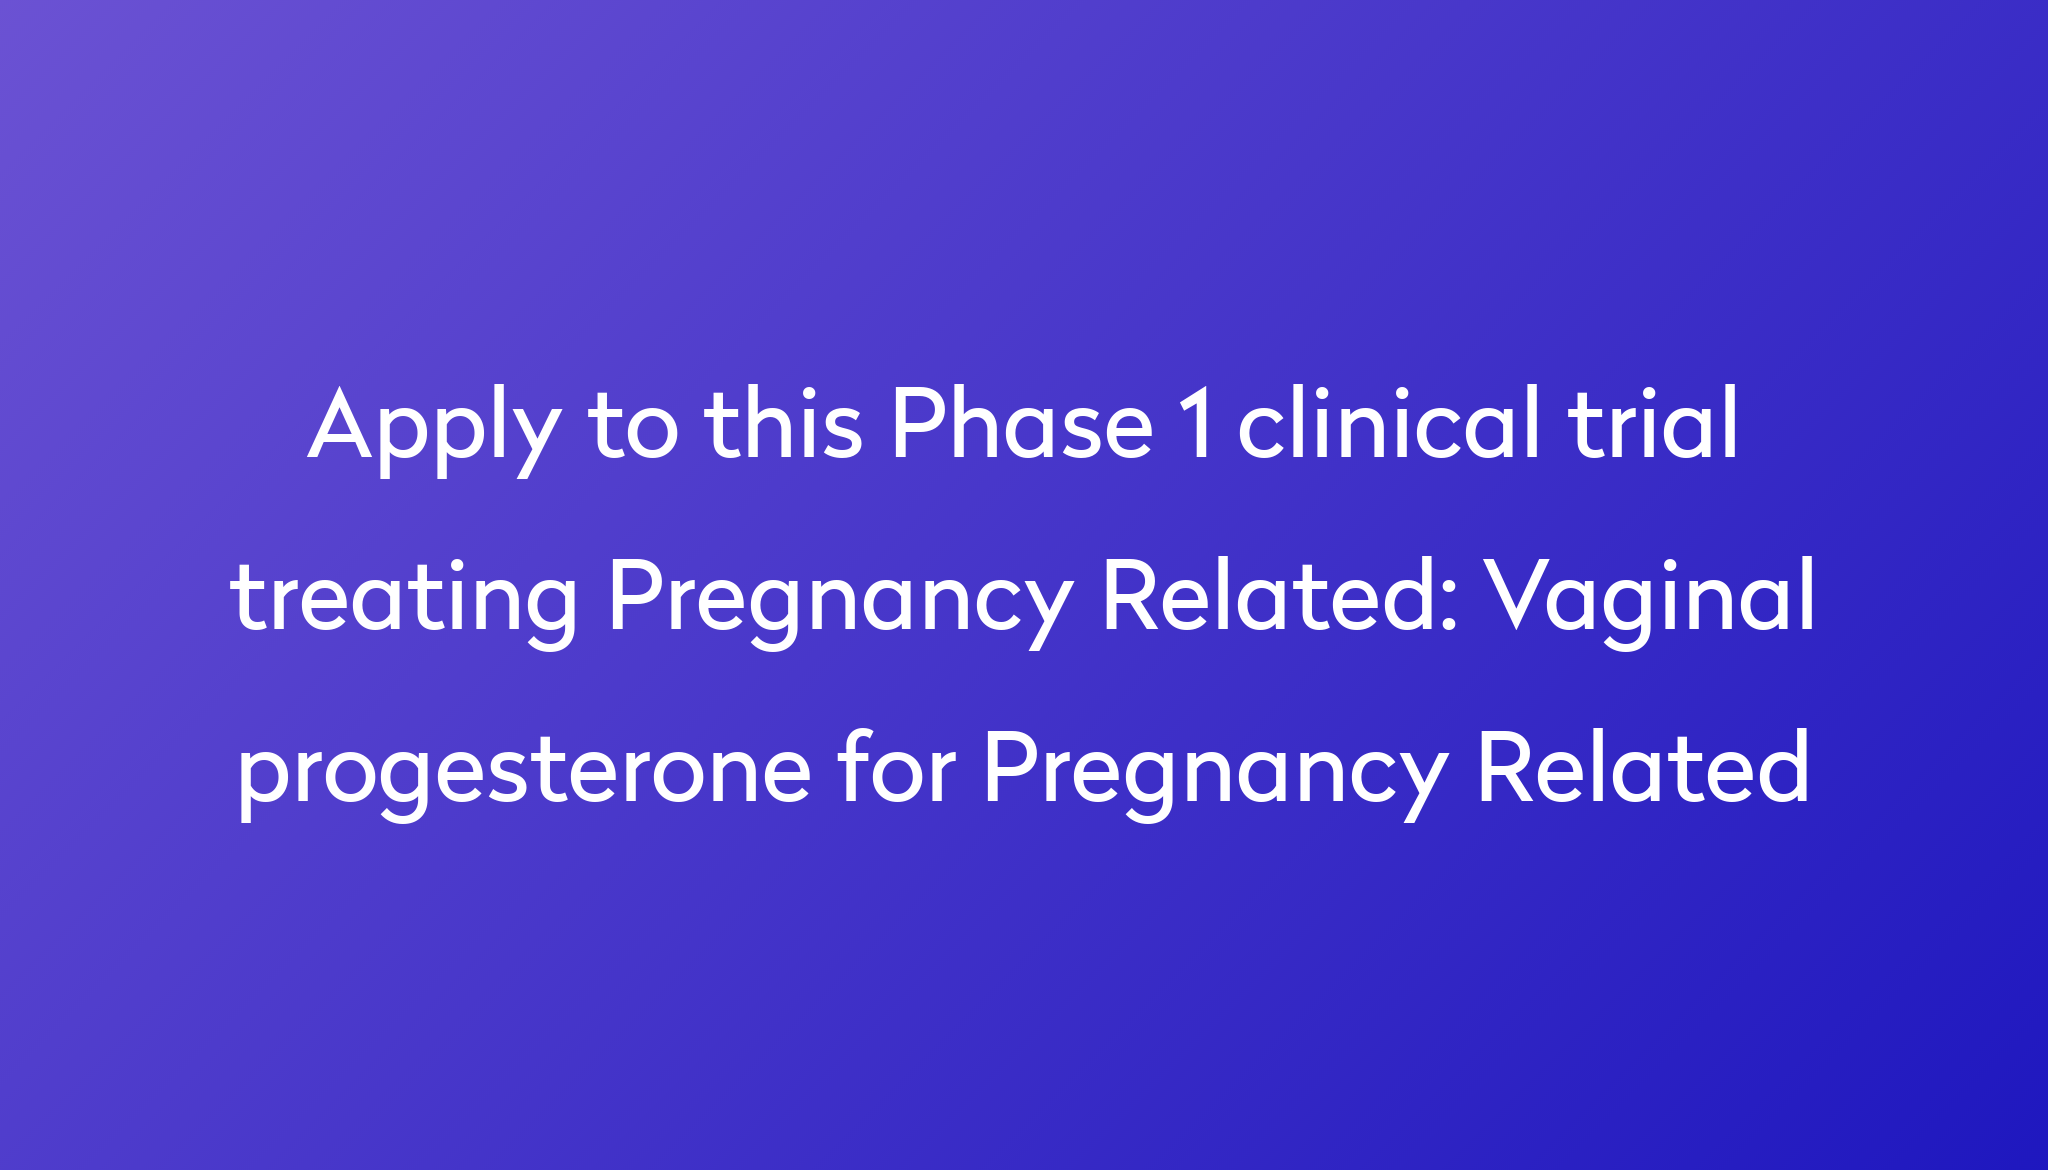 Vaginal progesterone for Pregnancy Related Clinical Trial 2022 | Power